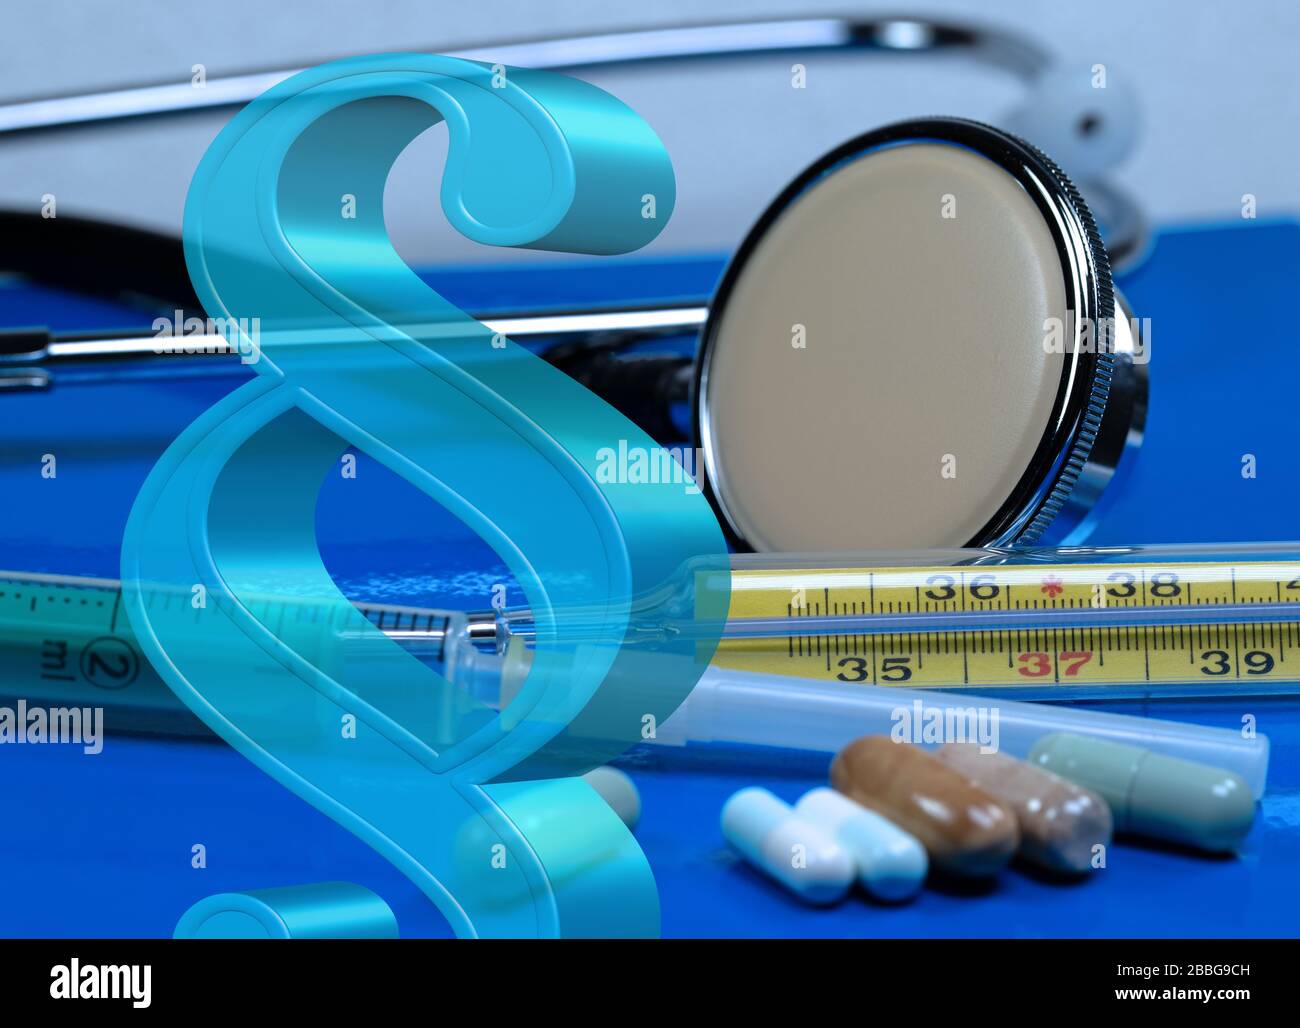 Medicines Act, Paragraph, Medicines and Medical Instruments Stock Photo